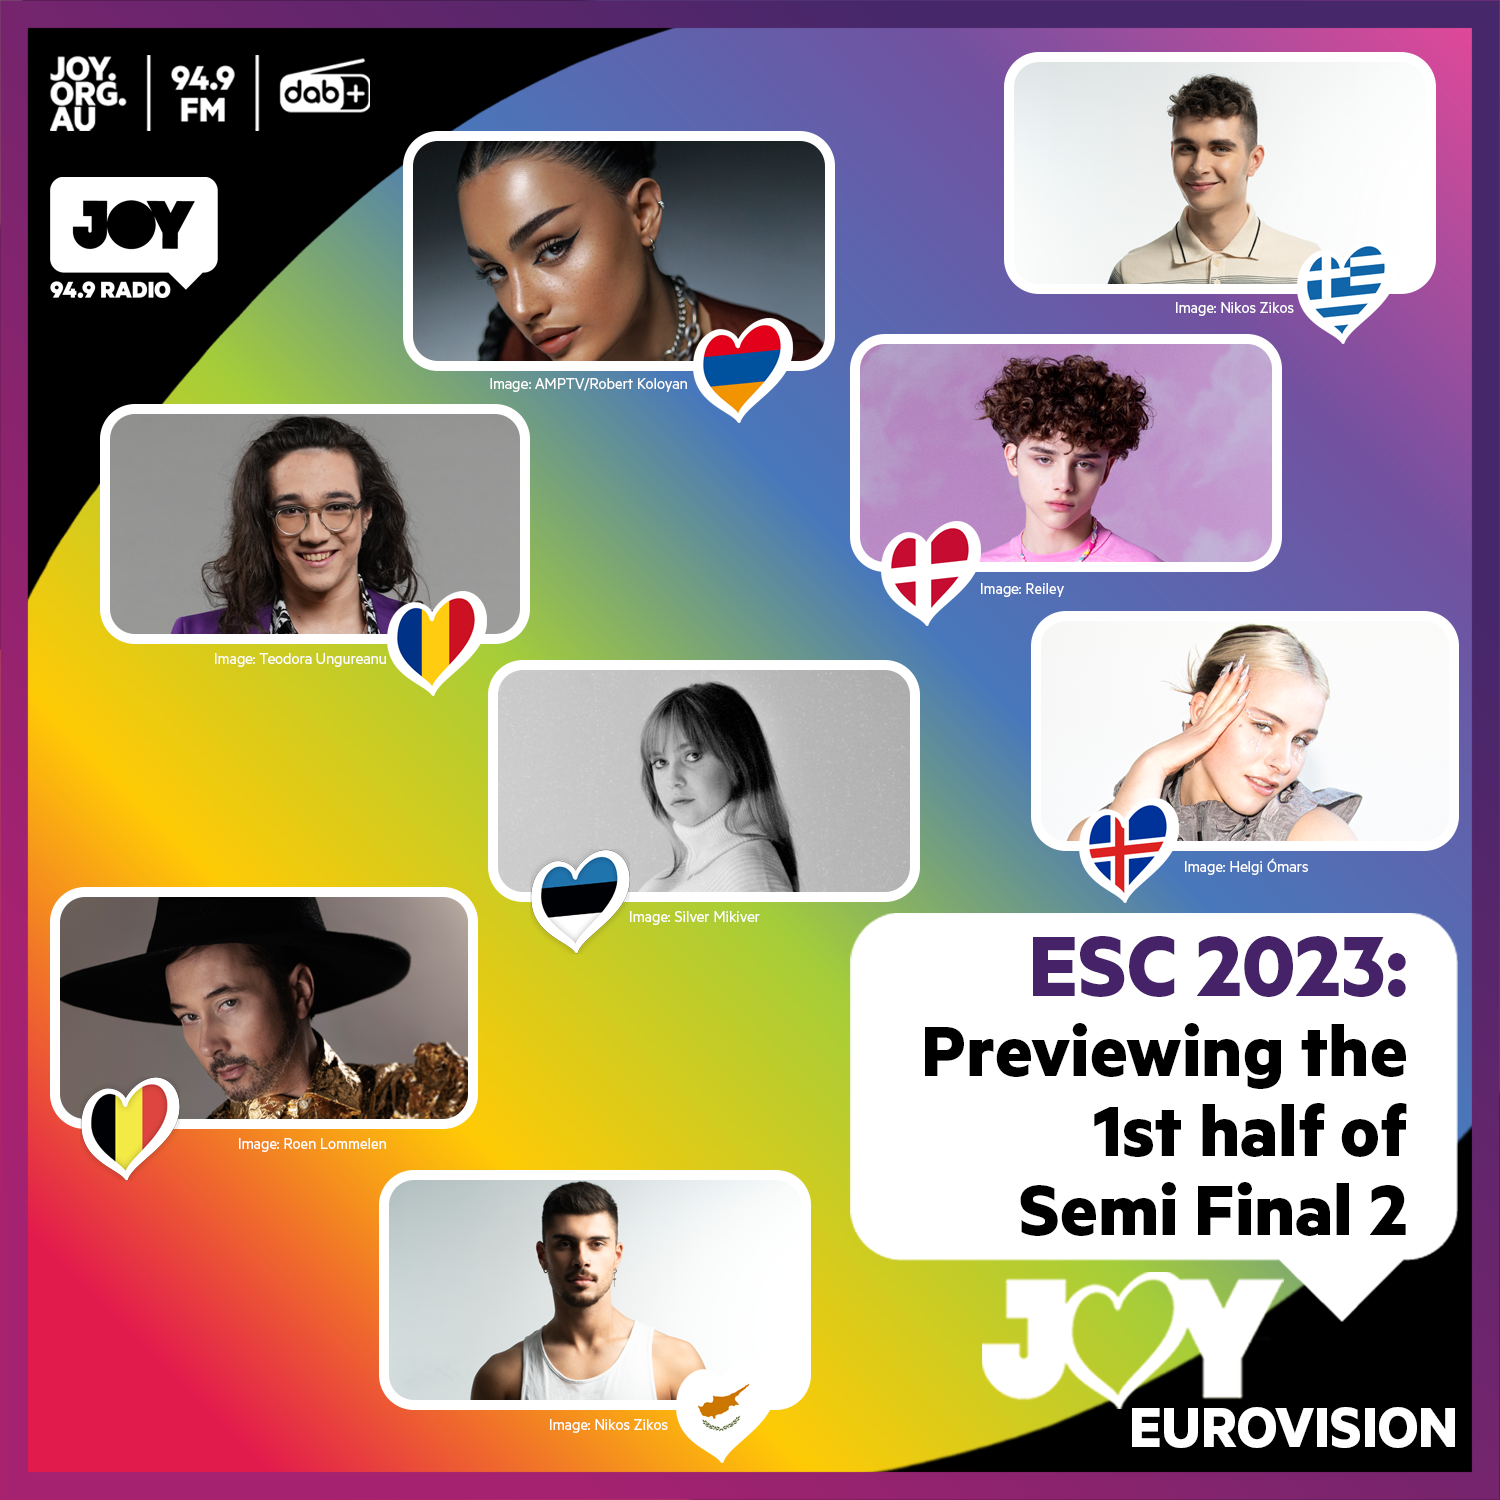 #UnitedByMusic: Previewing the first half of Eurovision Song Contest 2023 Semi Final 2